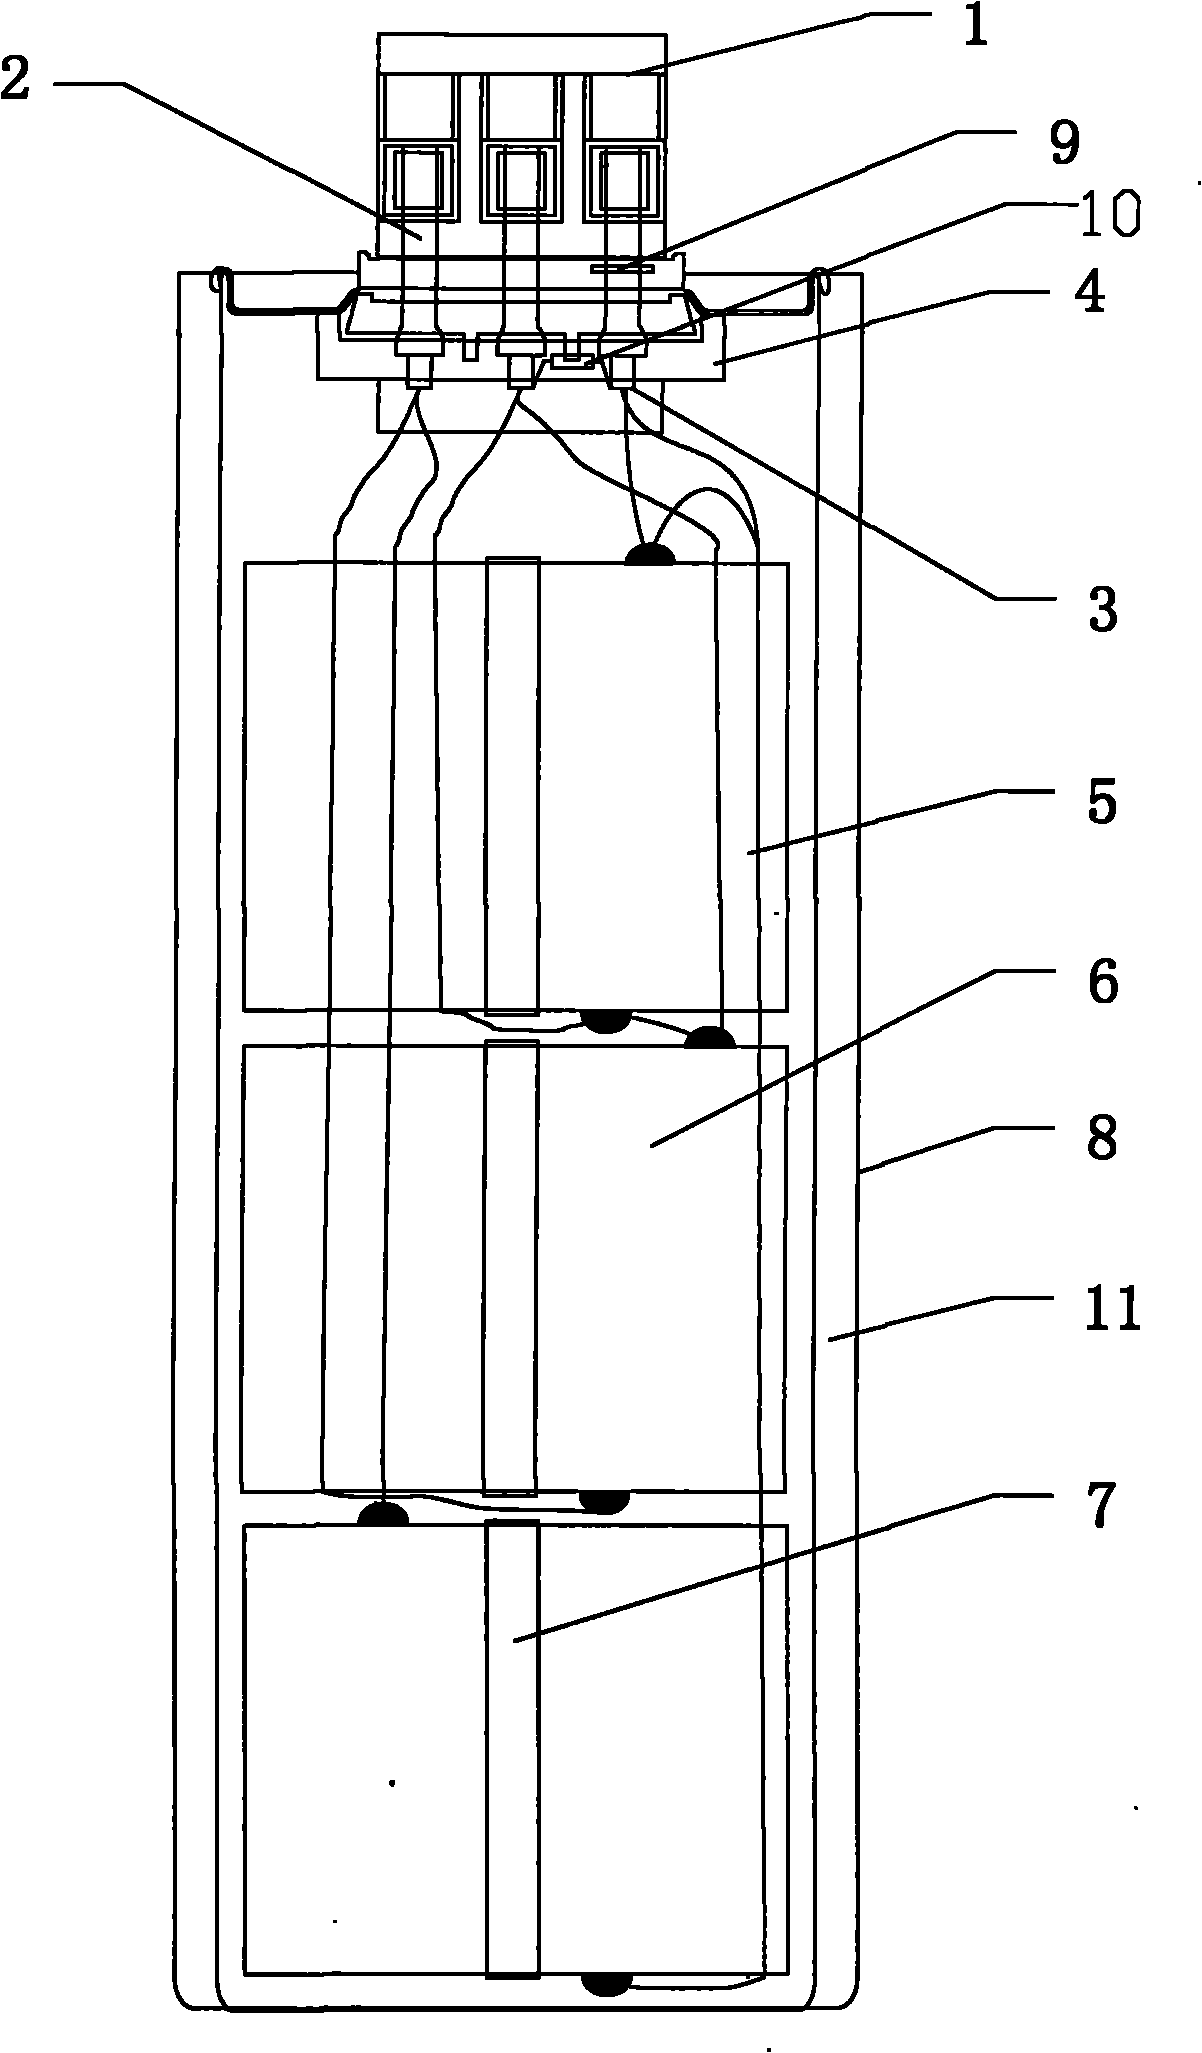 Self-healing low-voltage reactive power compensation capacitor